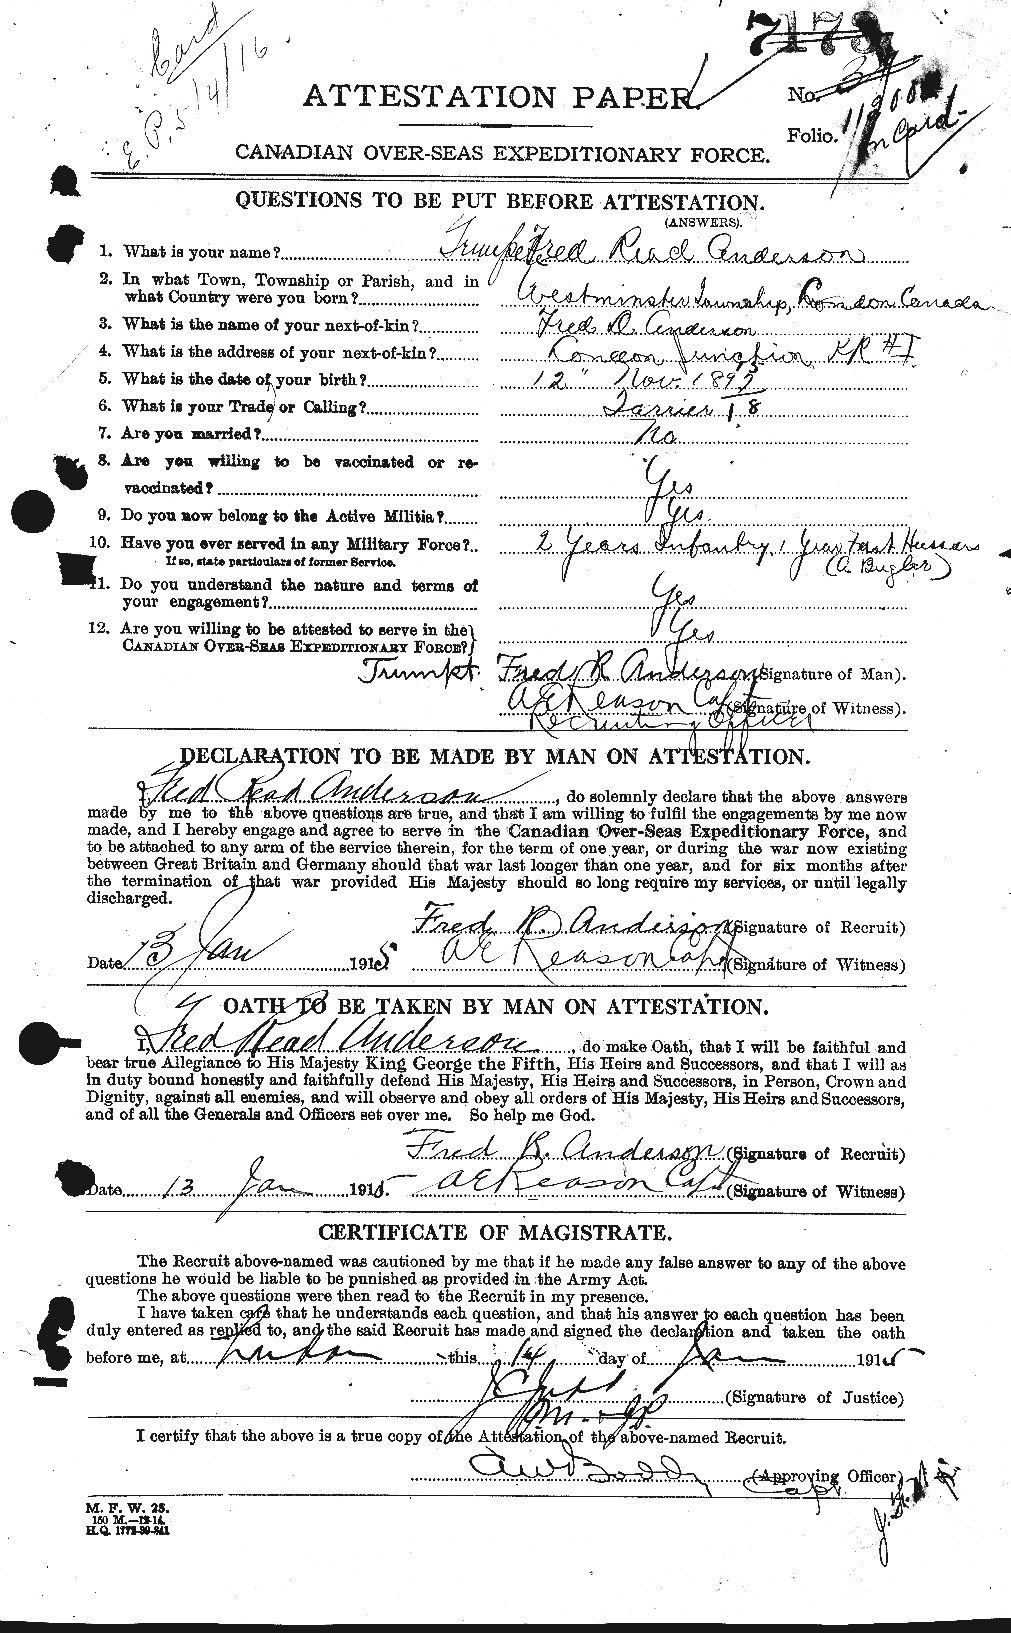 Personnel Records of the First World War - CEF 209830a